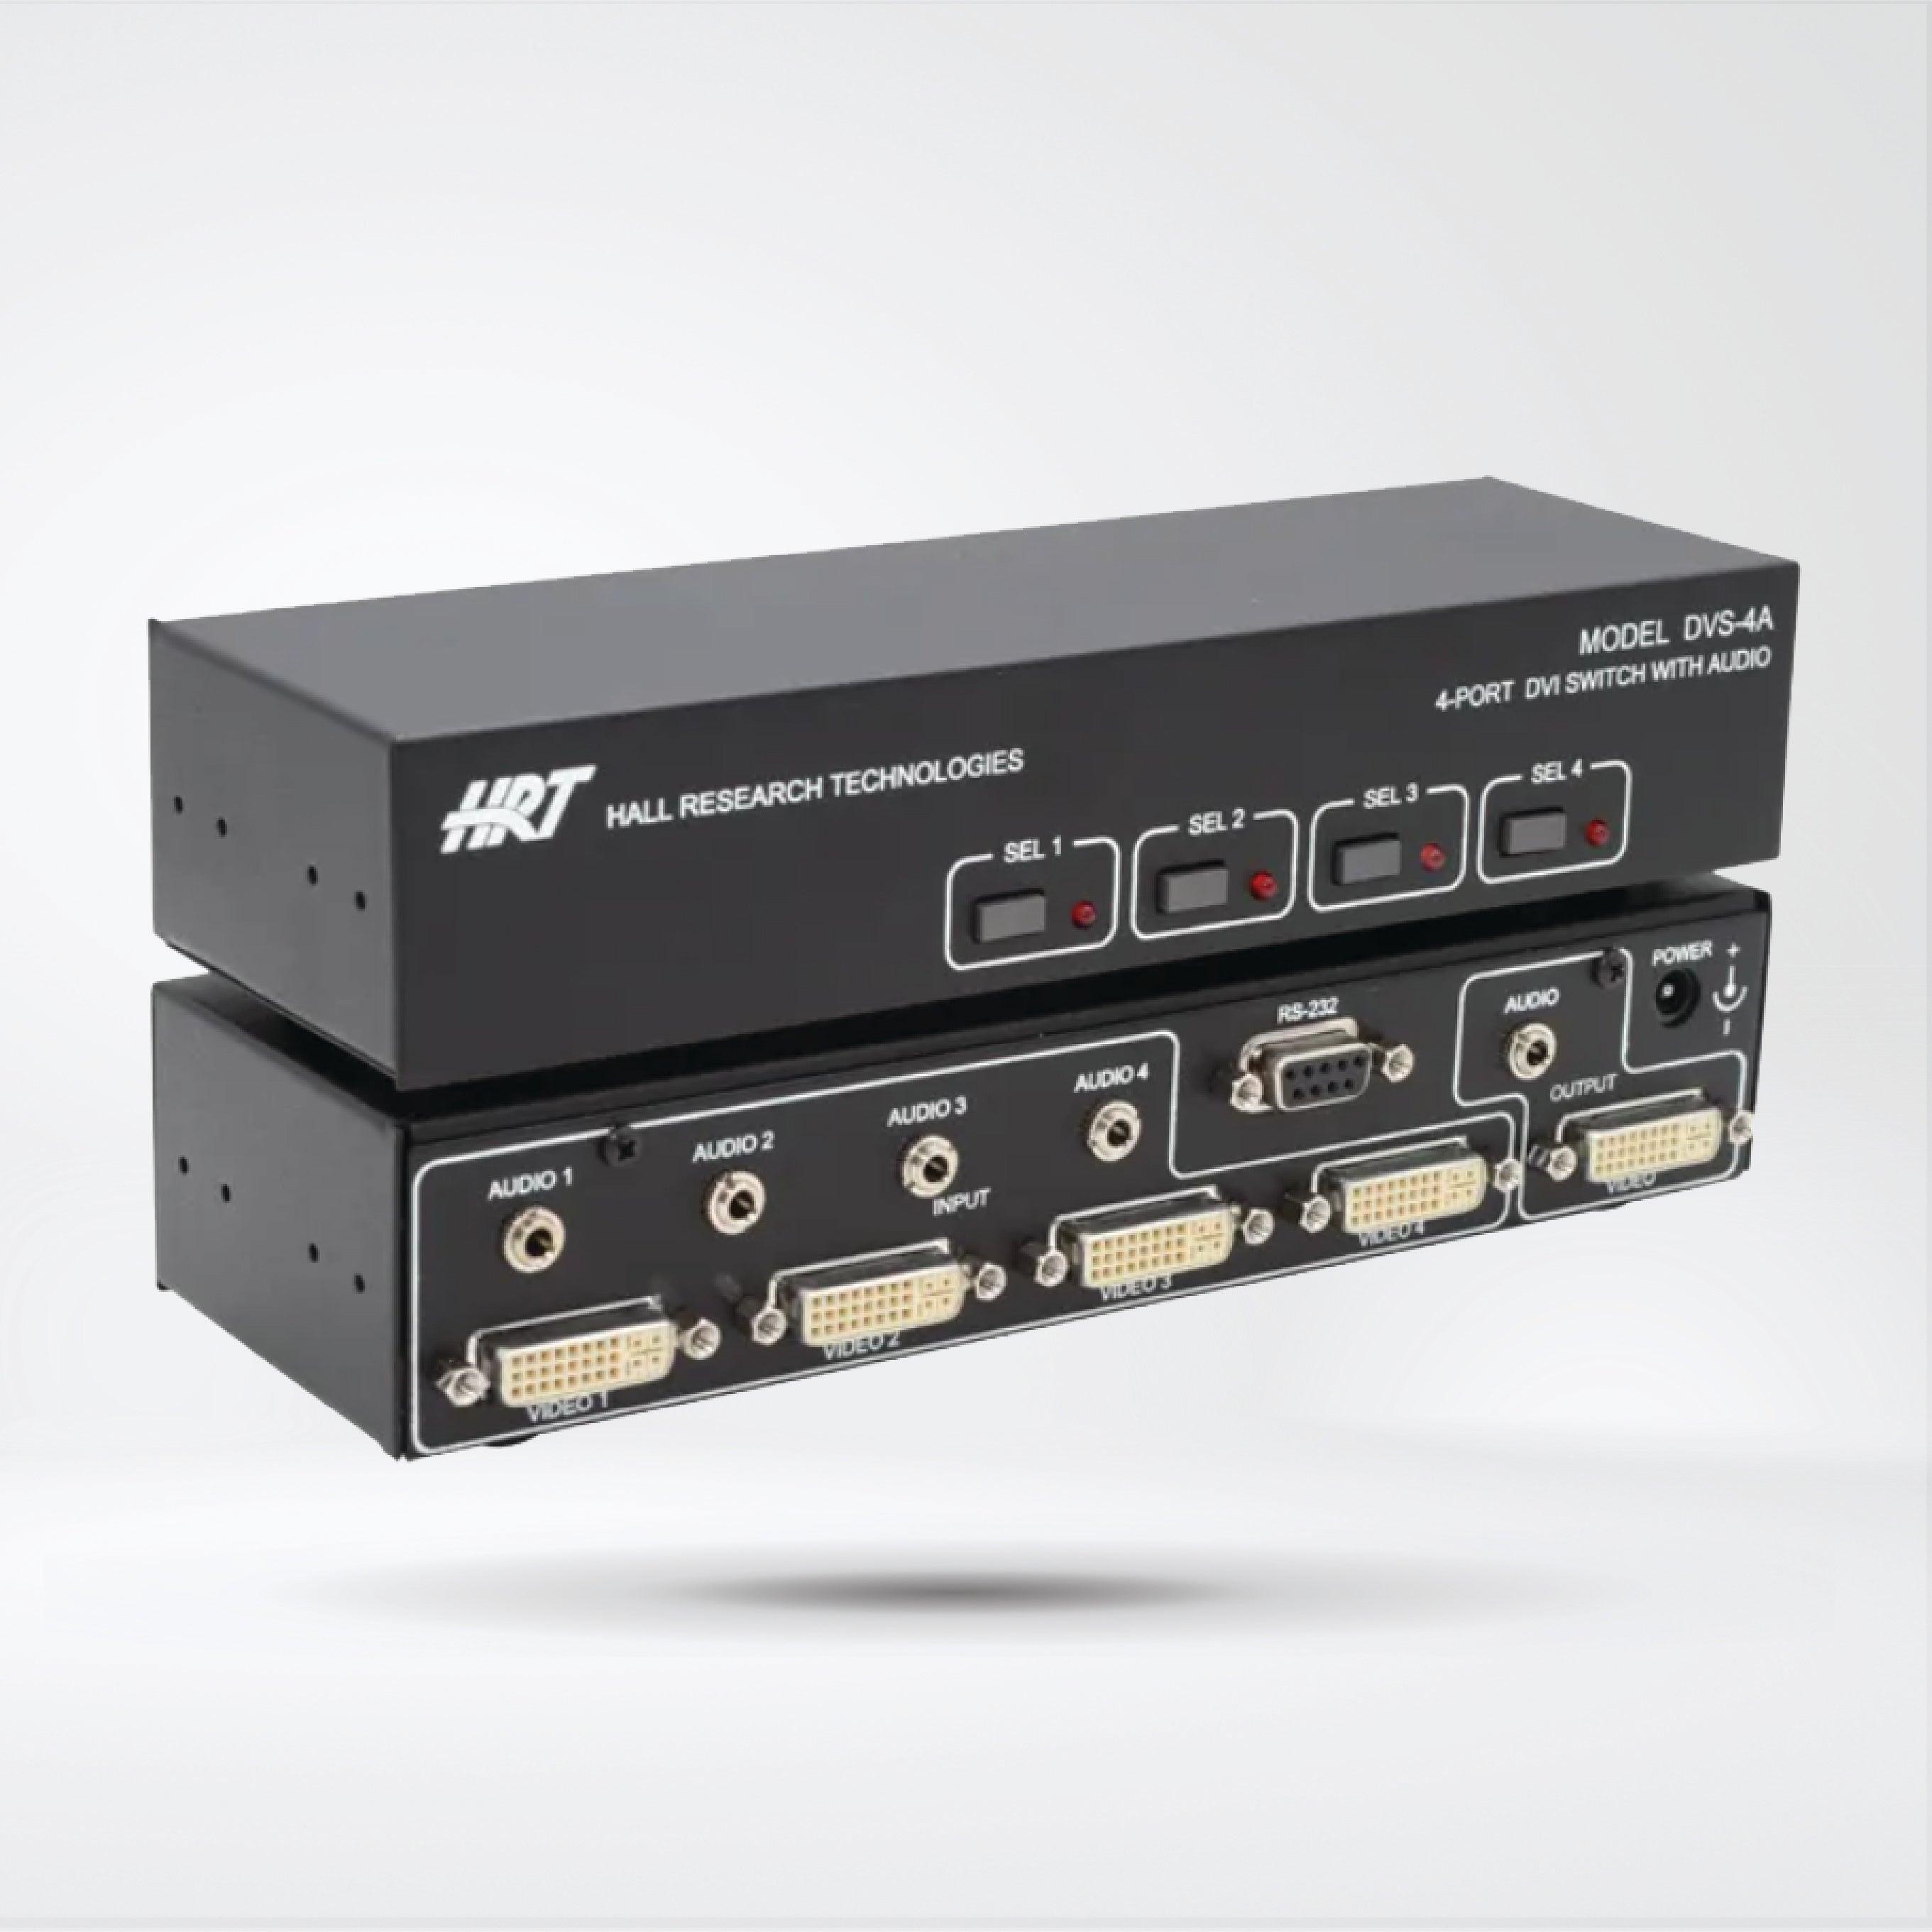 DVS-4A 4-Port DVI Switch with Audio, Serial Control & Long Cable Equalization - Riverplus